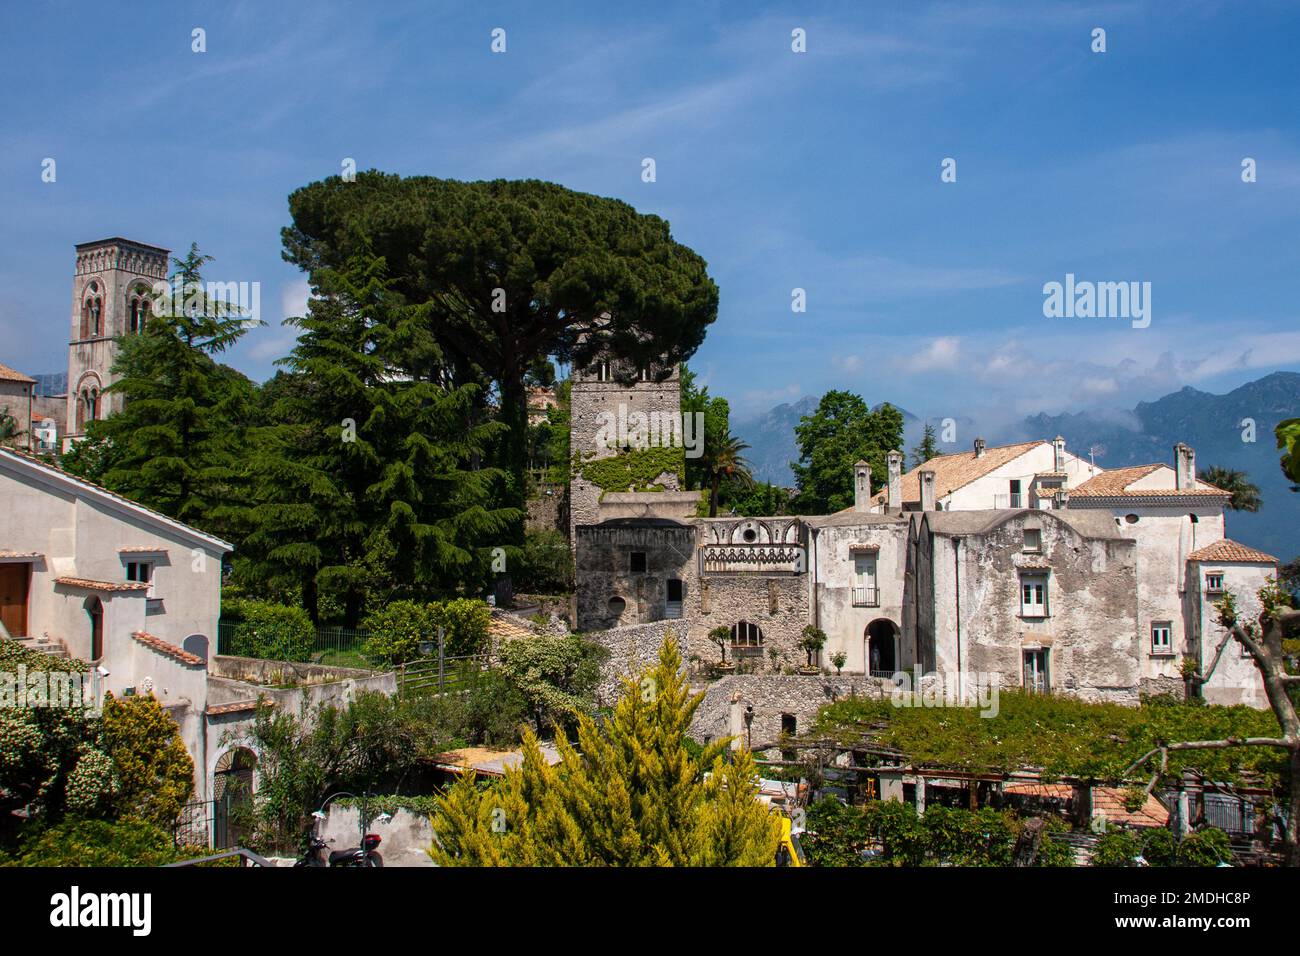 Plaza Central, Ravello, Italy Ravello is a town and comune situated above the Amalfi Coast in the province of Salerno, Campania, Southern Italy, with Stock Photo